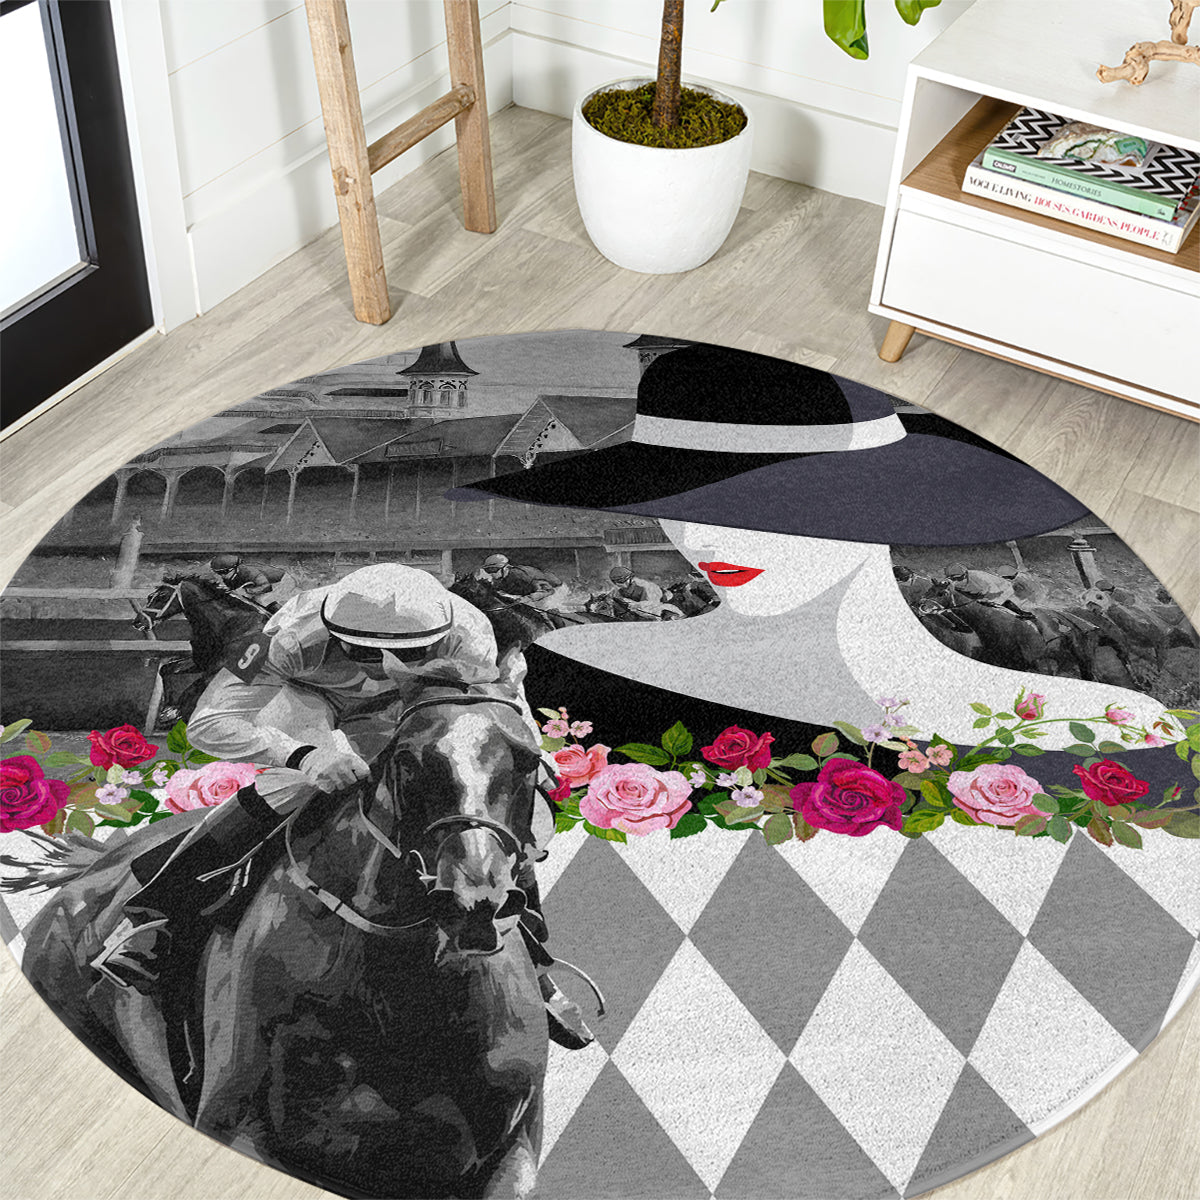 Kentucky Racing Horses Derby Hat Lady Round Carpet Churchill Downs and Roses Grayscale